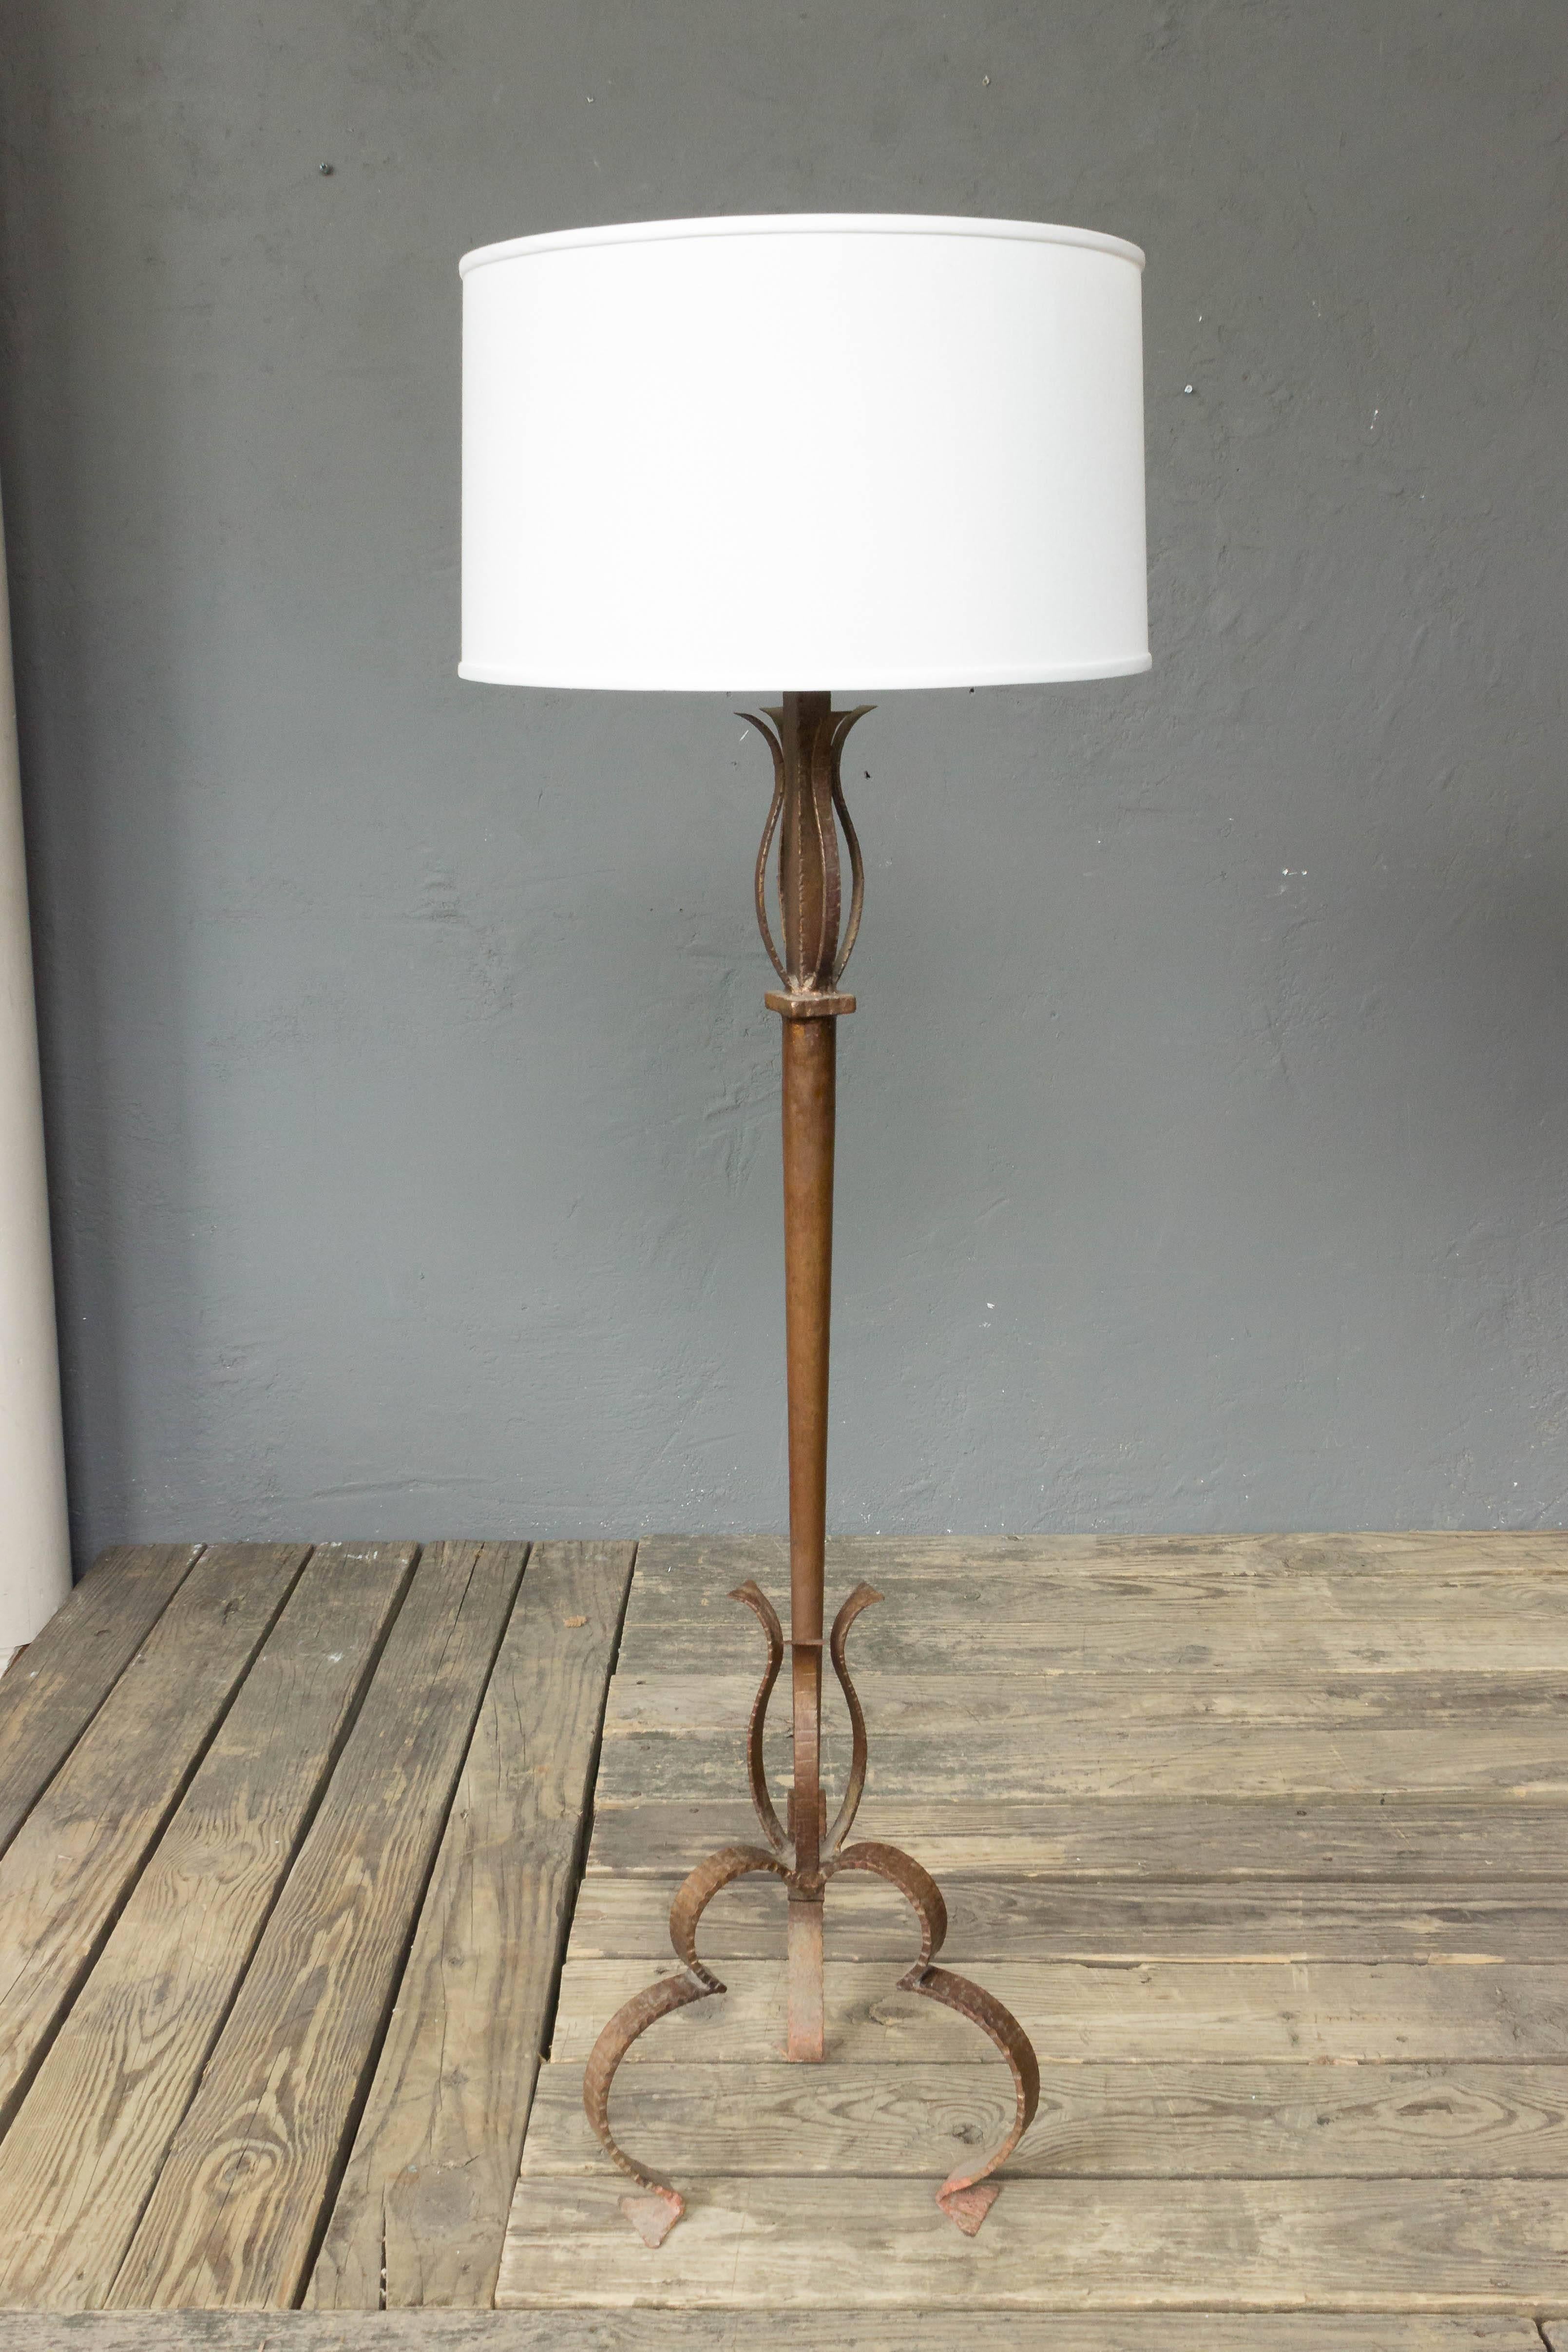 Spanish 1950s gilt iron floor lamp with intricate scroll work on an unusual tripod base. The lamp will be  rewired and cleaned

Not sold with shade.

Ref #: LF0400-11

Dimensions: 67”H x 13”Diameter at the base
